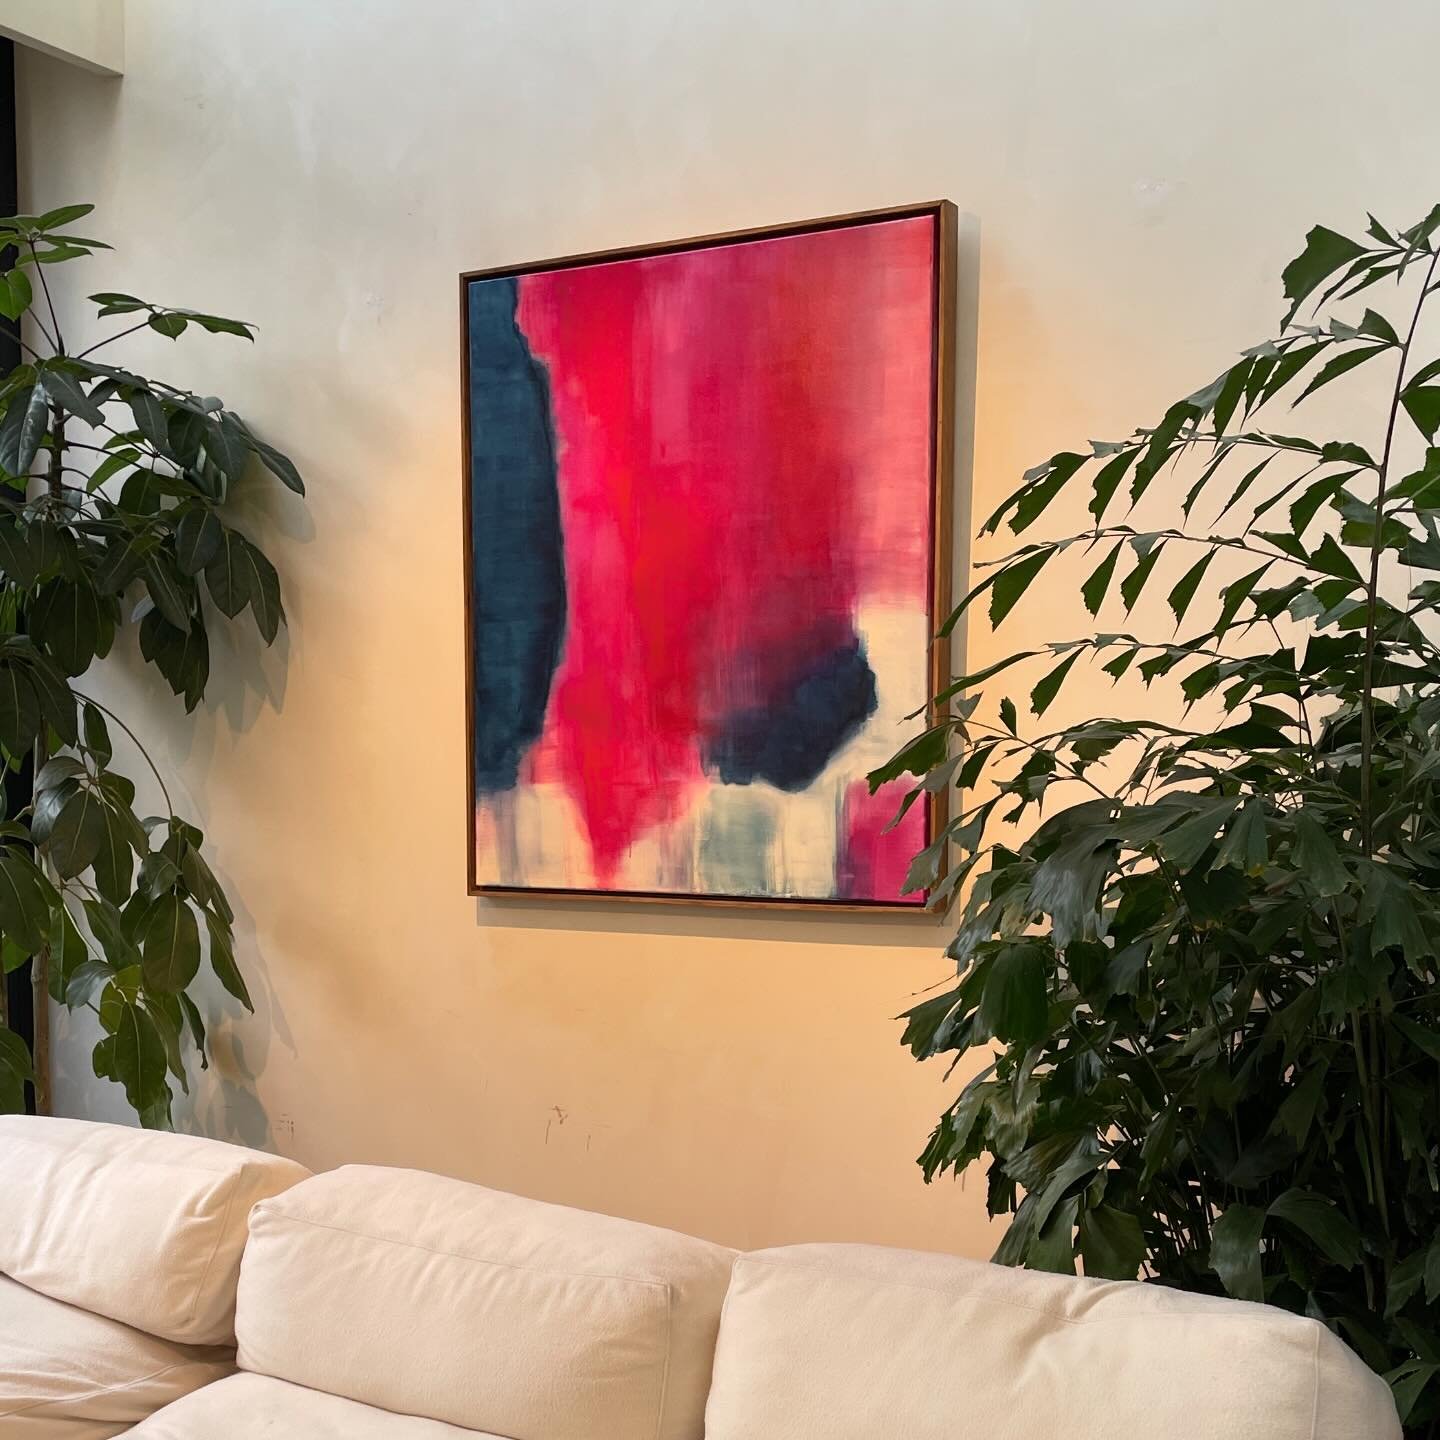 Maybe you&rsquo;ve seen this work hanging at @fosbury.amsterdam , it found a new home recently! I love it when my art travels and then finds a permanent residency.

#contemporaryart #interiordesign #interiordecor